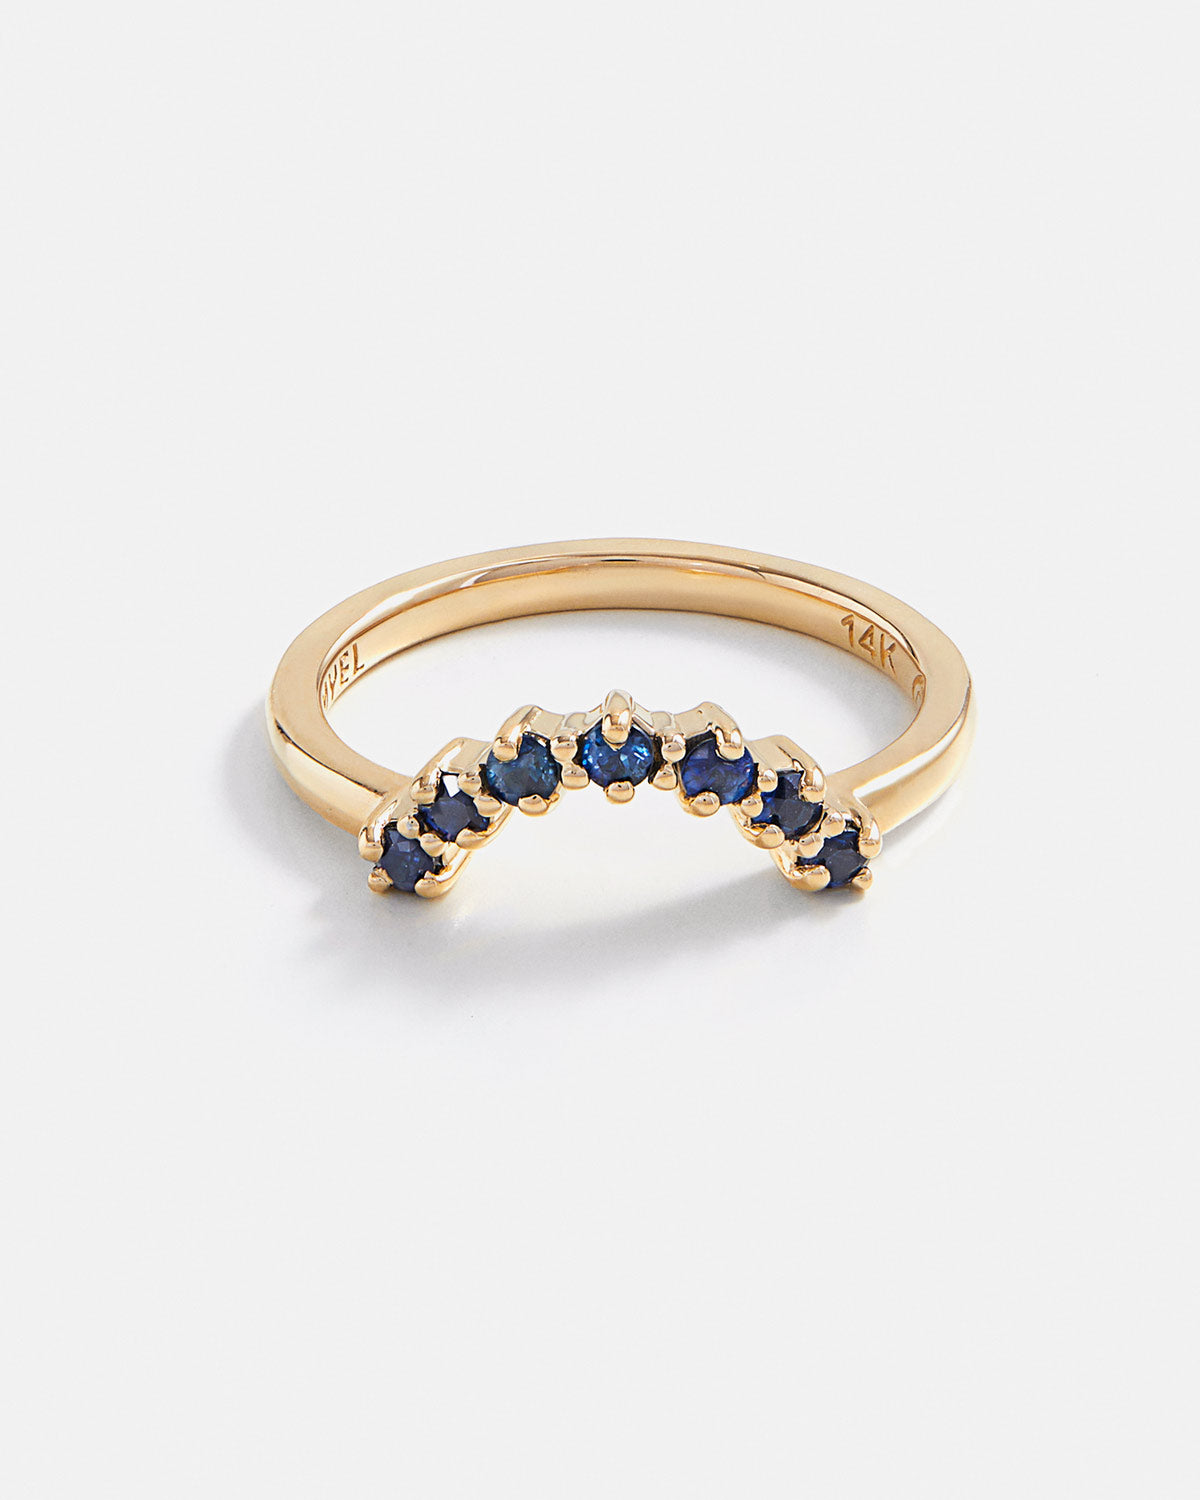 Wave band in 14k Fairmined Yellow Gold with Australian Sapphires